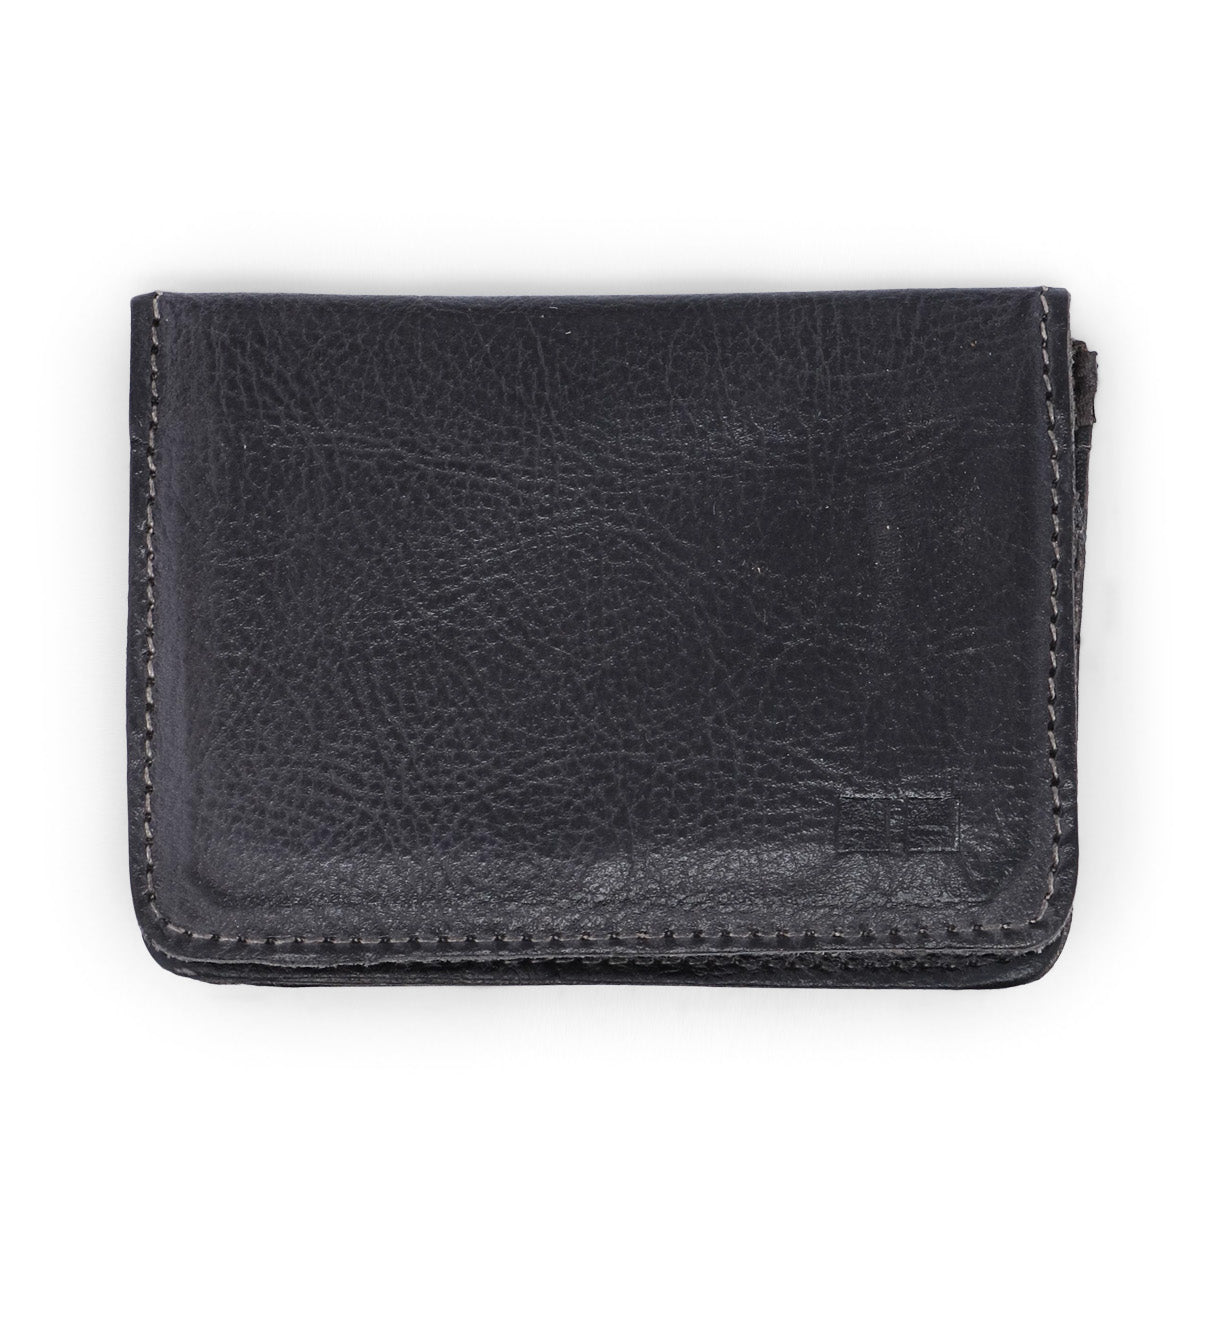 A Bed Stu black leather Jeor wallet on a white background.